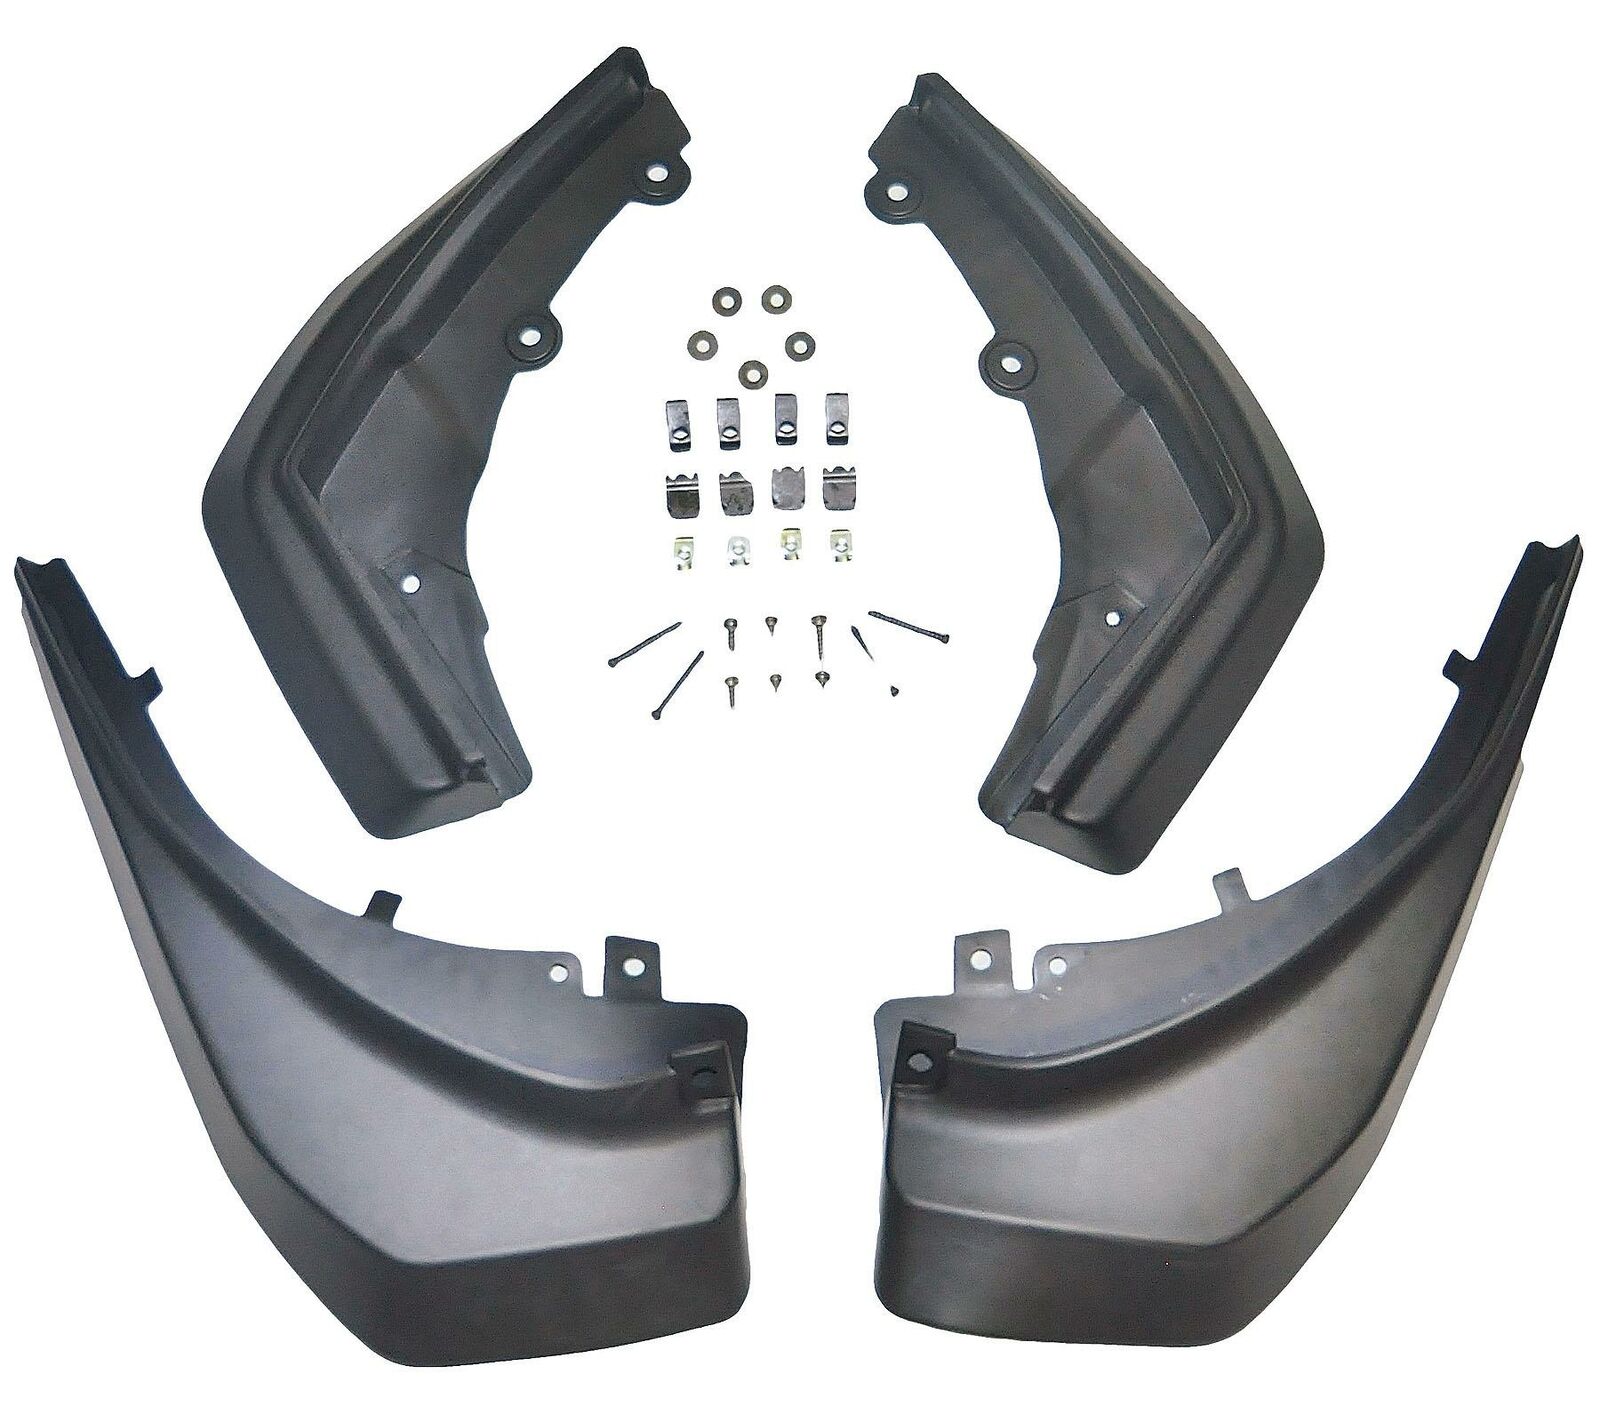 Front & Rear Mud Guards FOR Range Rover Evoque LV 2.2 SD4 [2011-2016]